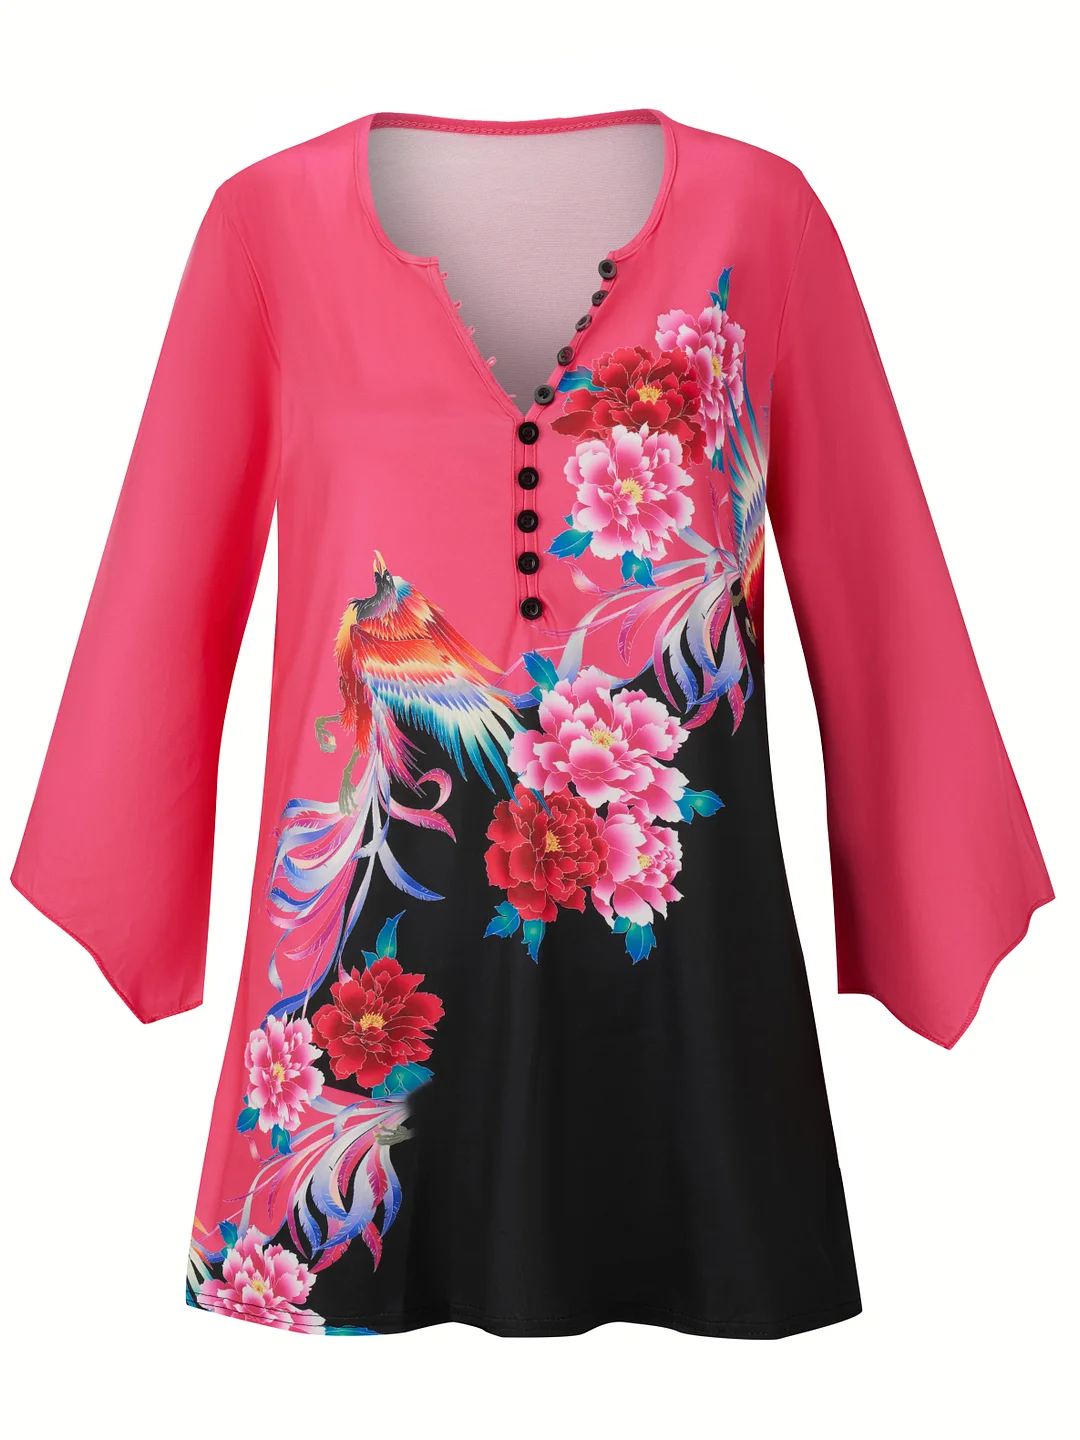 Style & Comfort for Mature Women Women 3/4 Sleeve V-neck Colorblock Floral Printed Tops